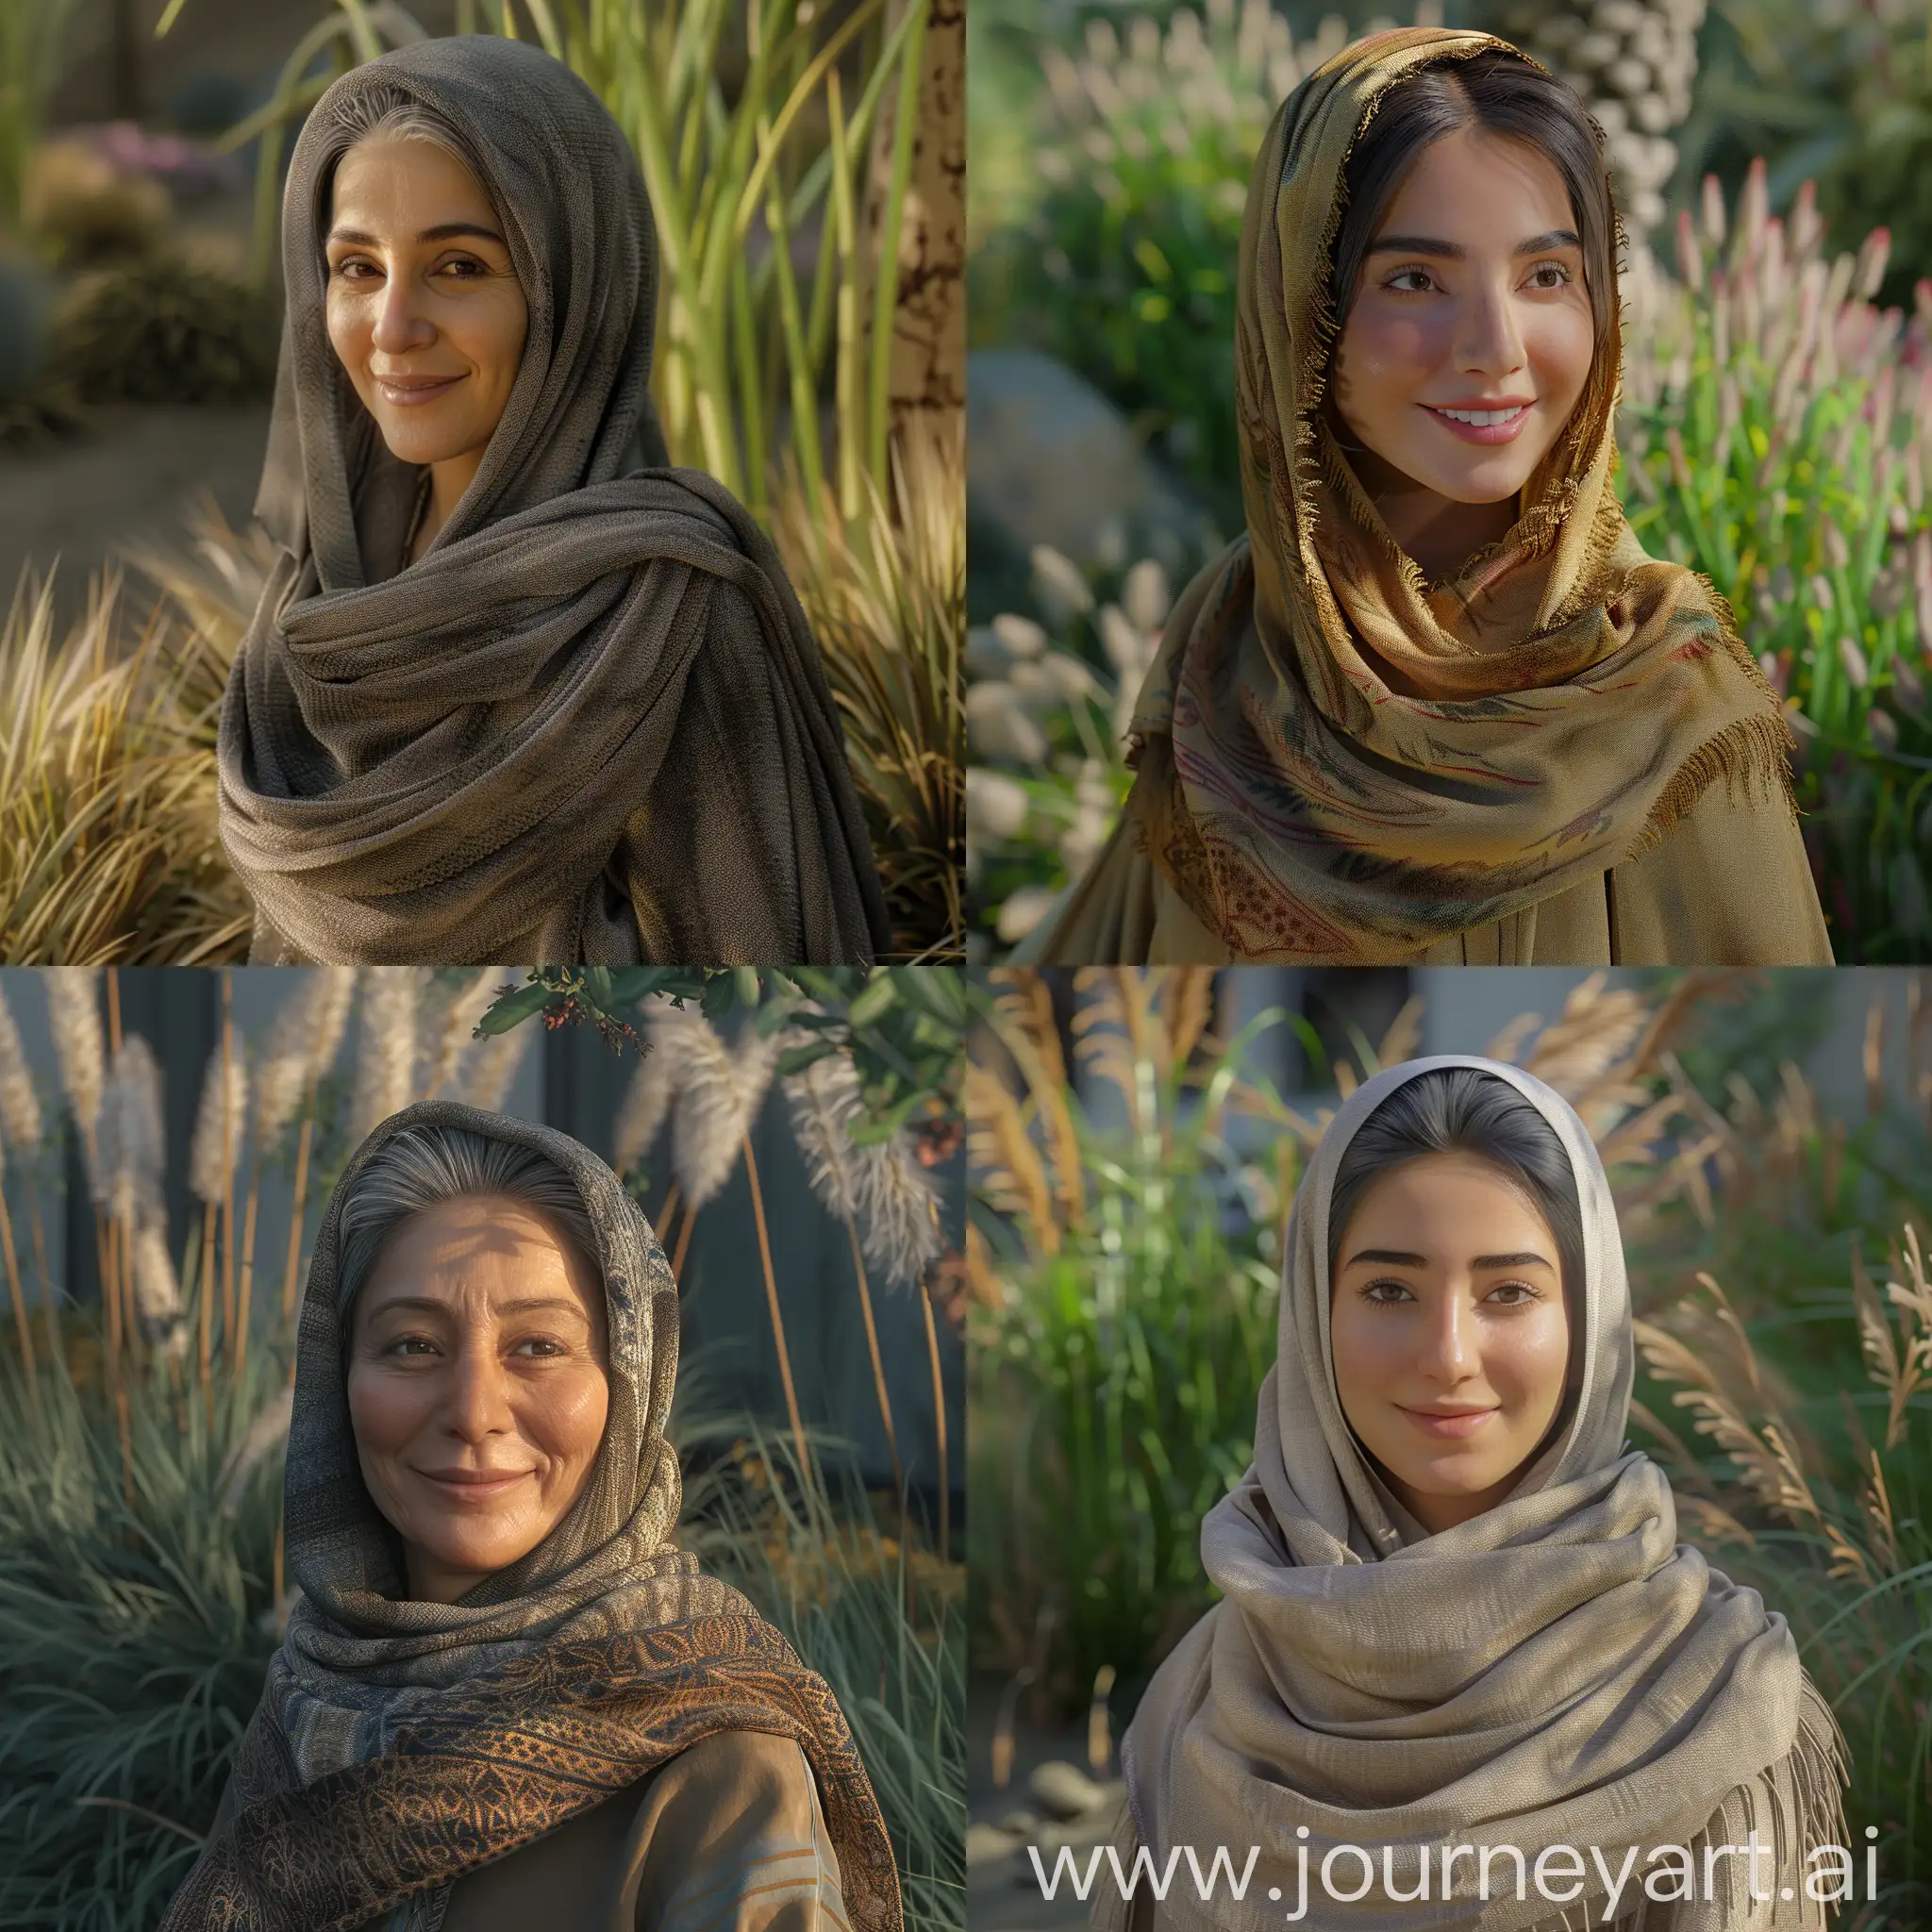 A 40 year old Iranian woman, super real, individual, scarf, hijab, very real and natural texture, smile, beautiful, morning, beautiful garden full of grass and plants, round face, 8K HD.